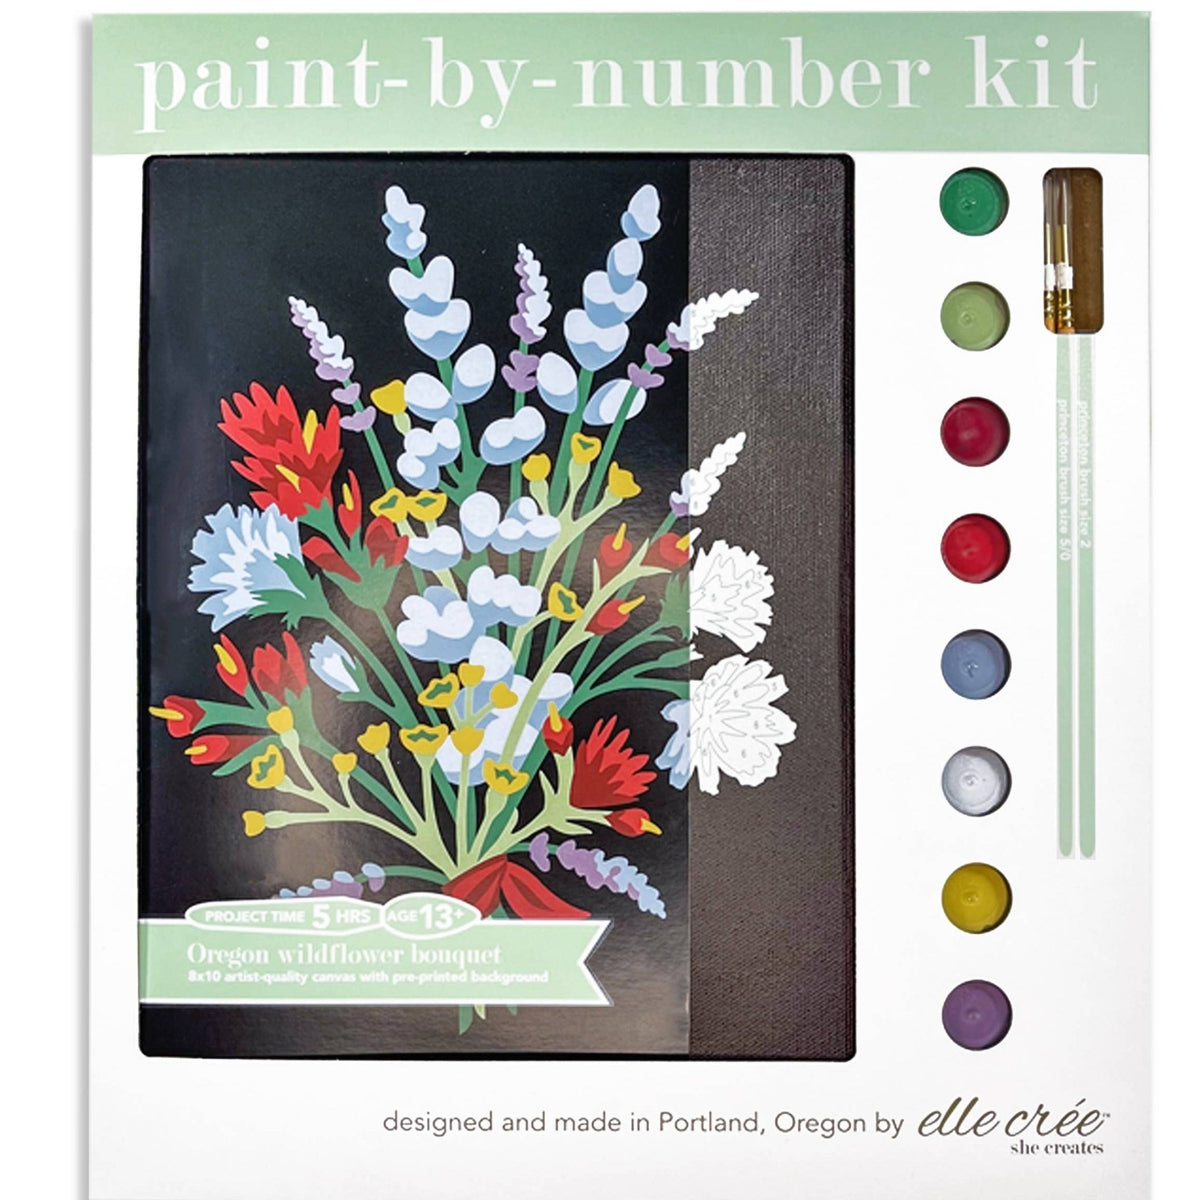 Paint-by-Number Kit - Oregon Wildflower Bouquet - Gift & Gather